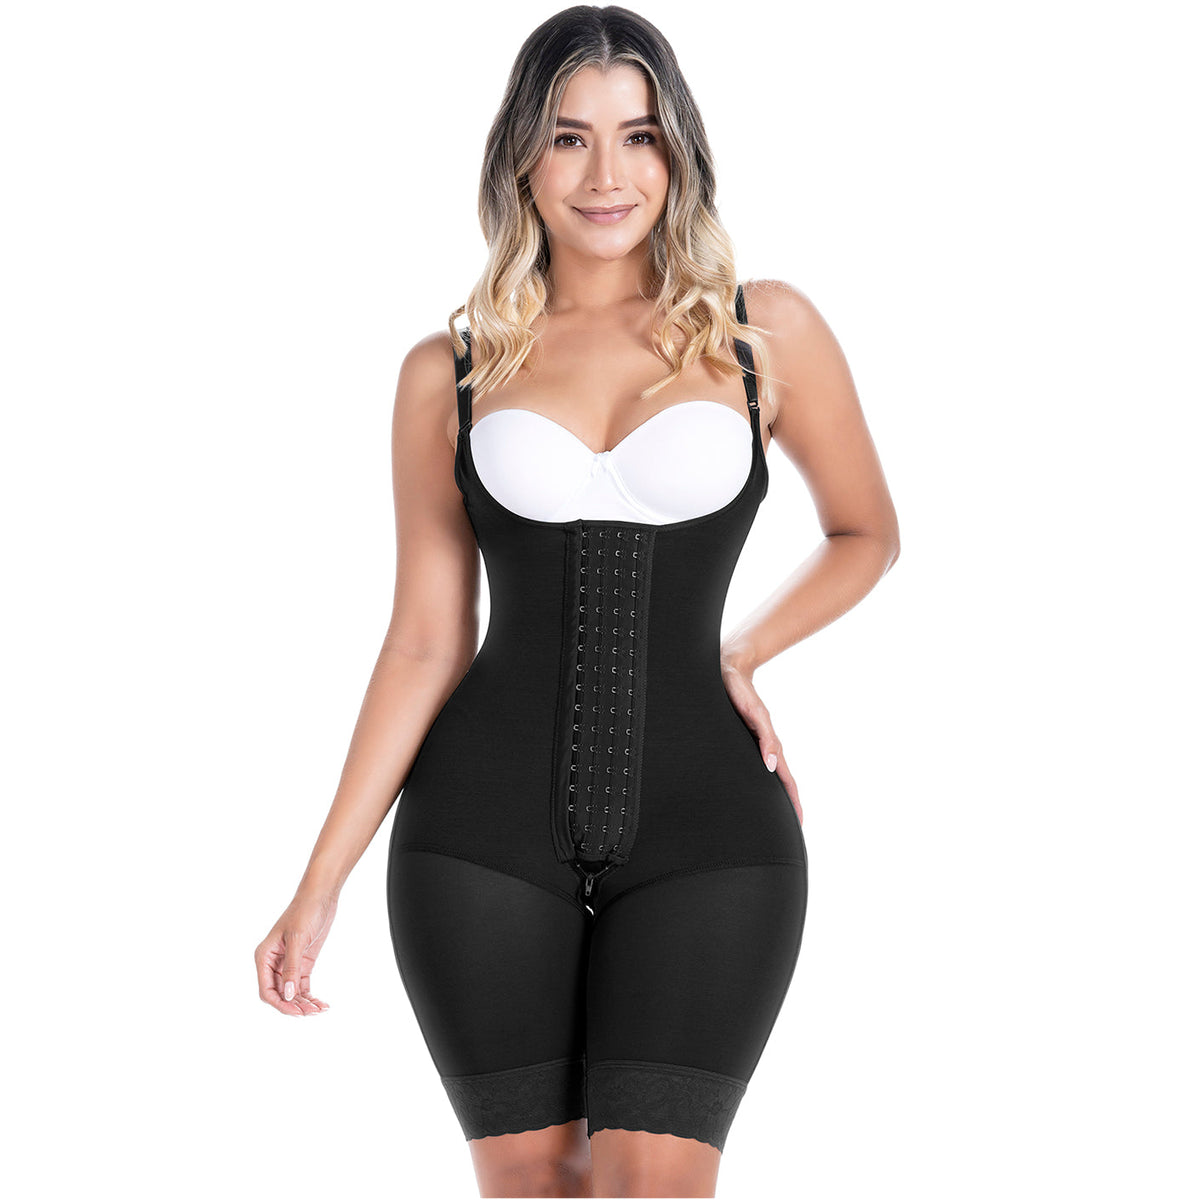 SONRYSE 048BF | Fajas Colombianas Post Surgery Open Bust Shapewear Compression Garment